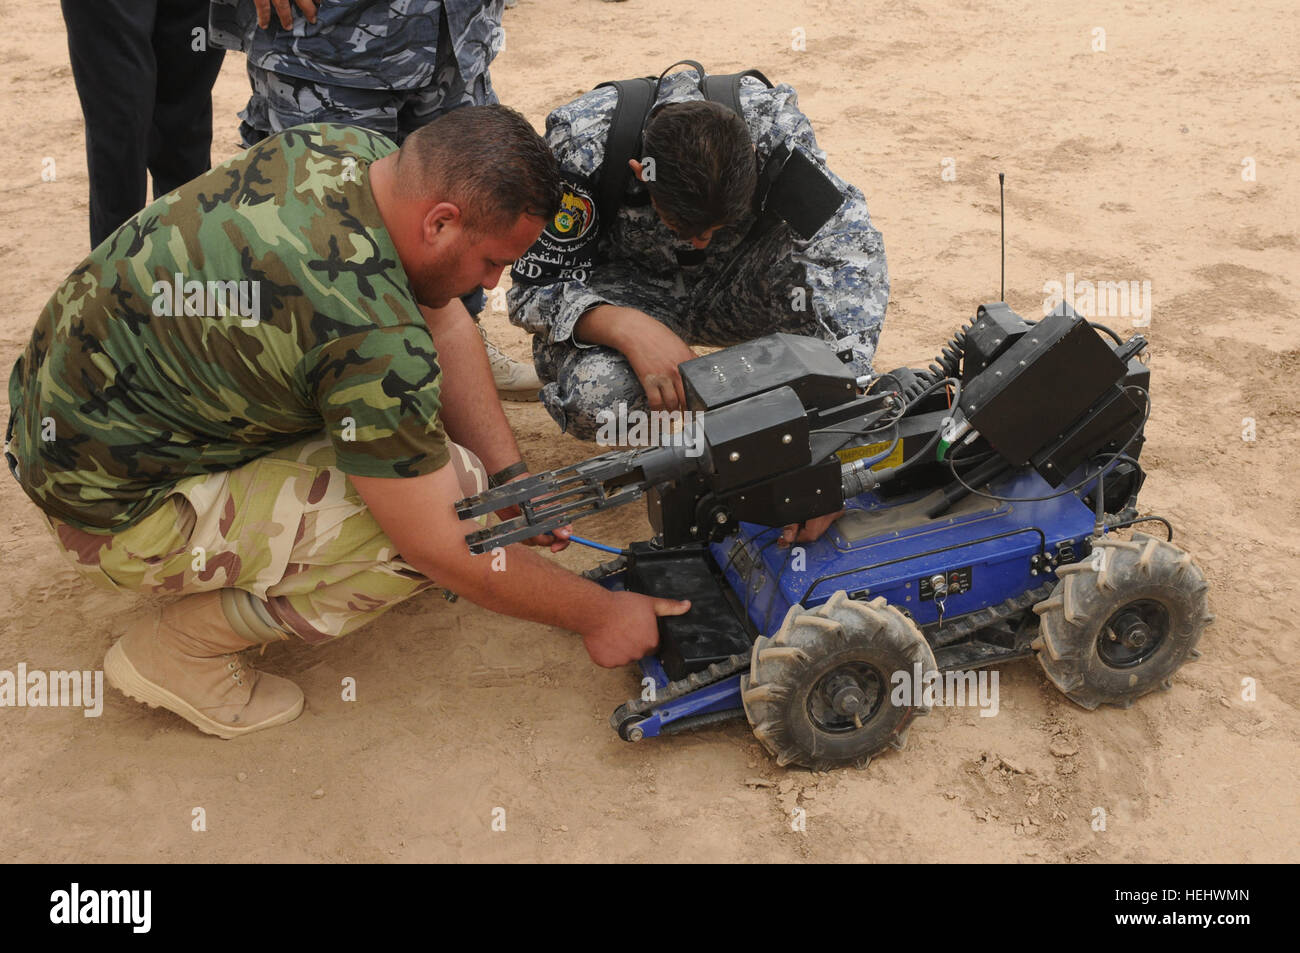 Members of the Iraqi police counter explosive team replace the dead battery on the Explosive Ordnance remote control robot during a training exercise on Contingency Operating Base Speicher, in Tikrit, Iraq, on April 25. Iraqi Explosive Ordnance Disposal Training in Tikrit, Iraq 169164 Stock Photo